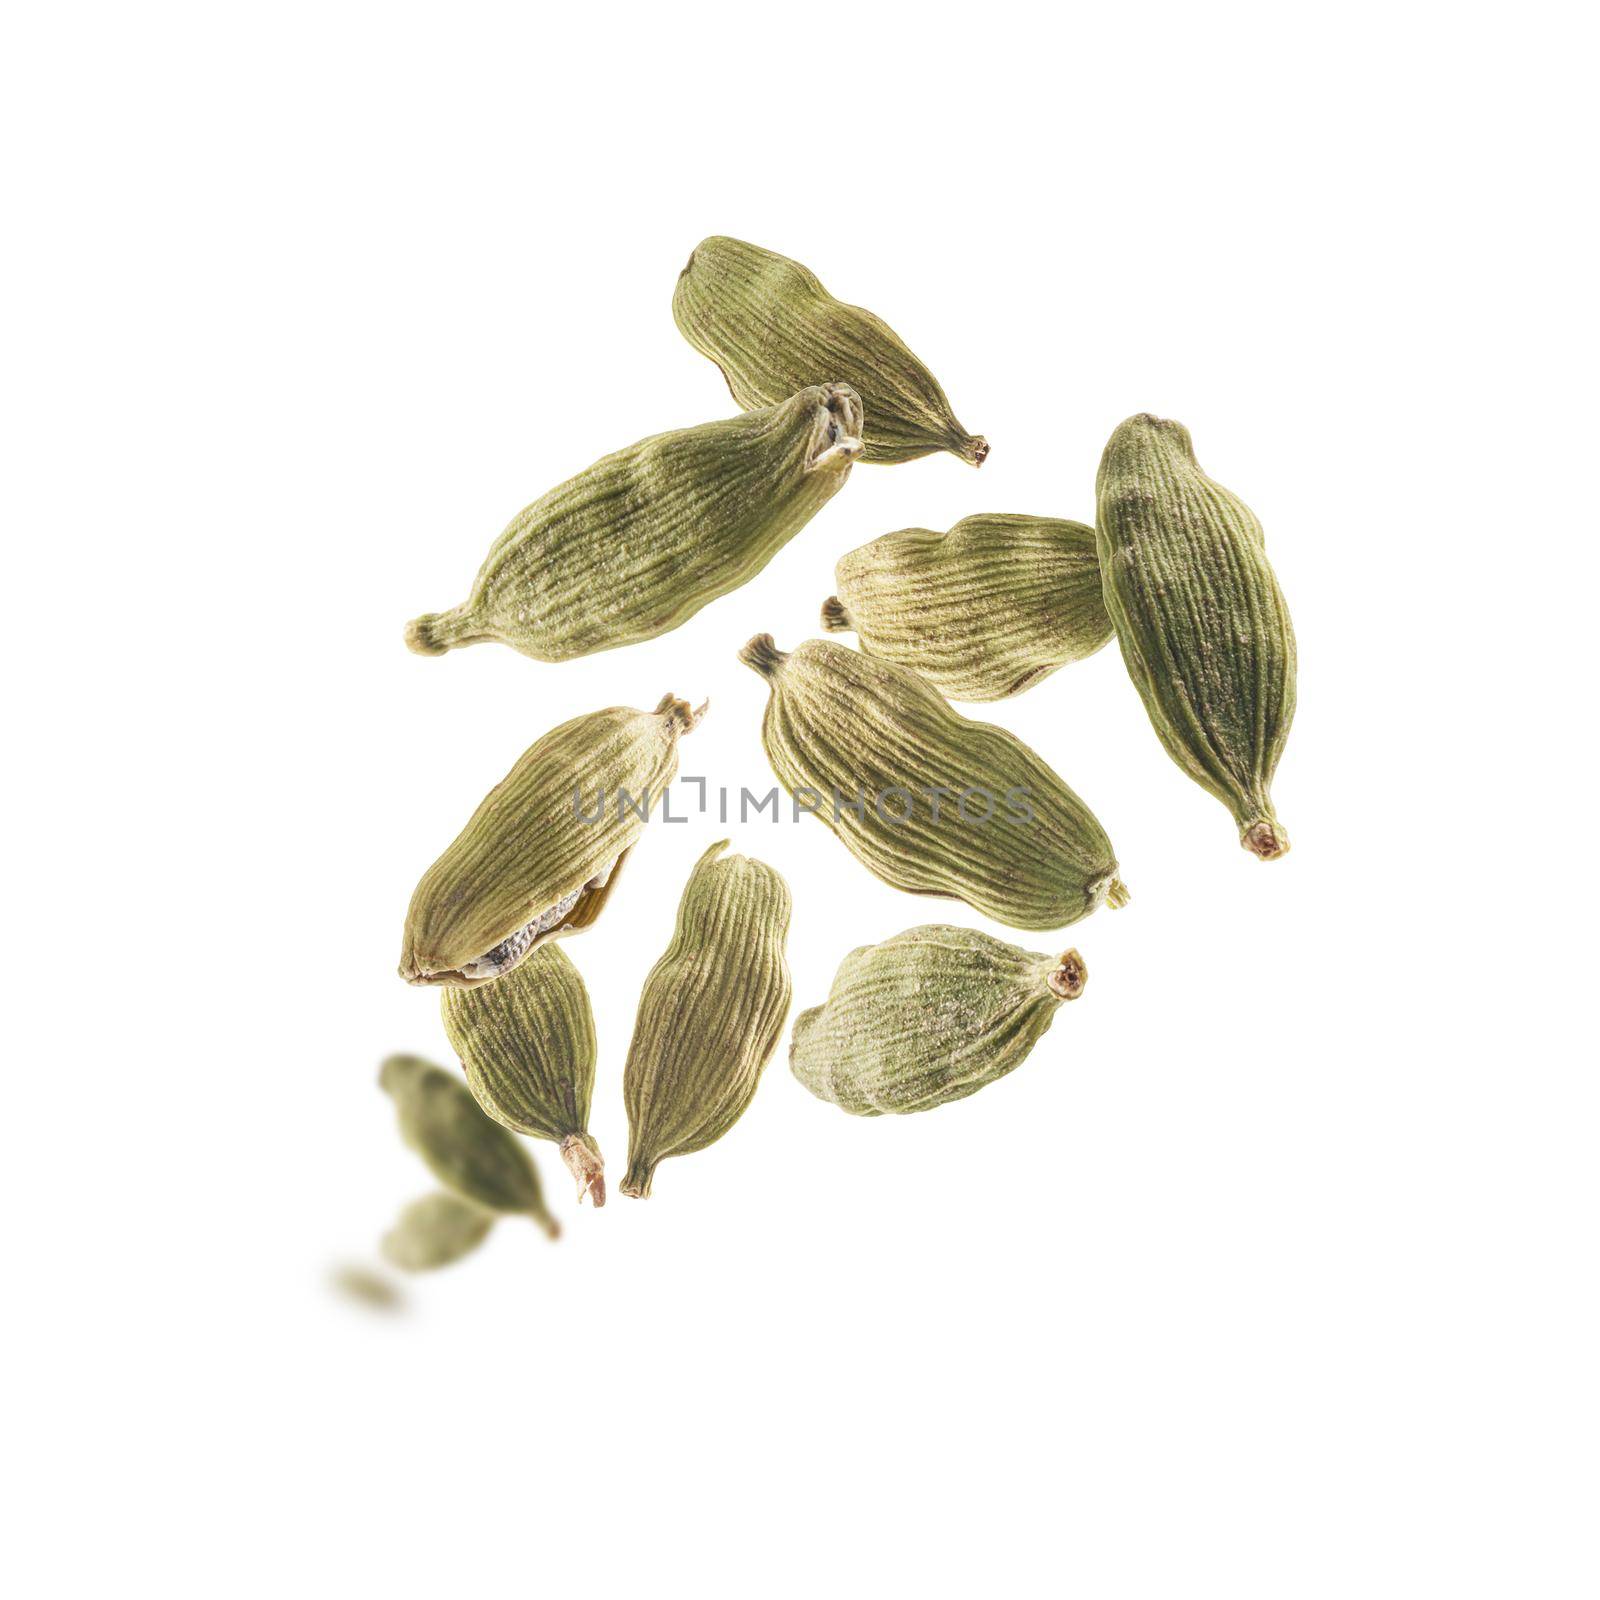 Cardamom pods levitate on a white background by butenkow